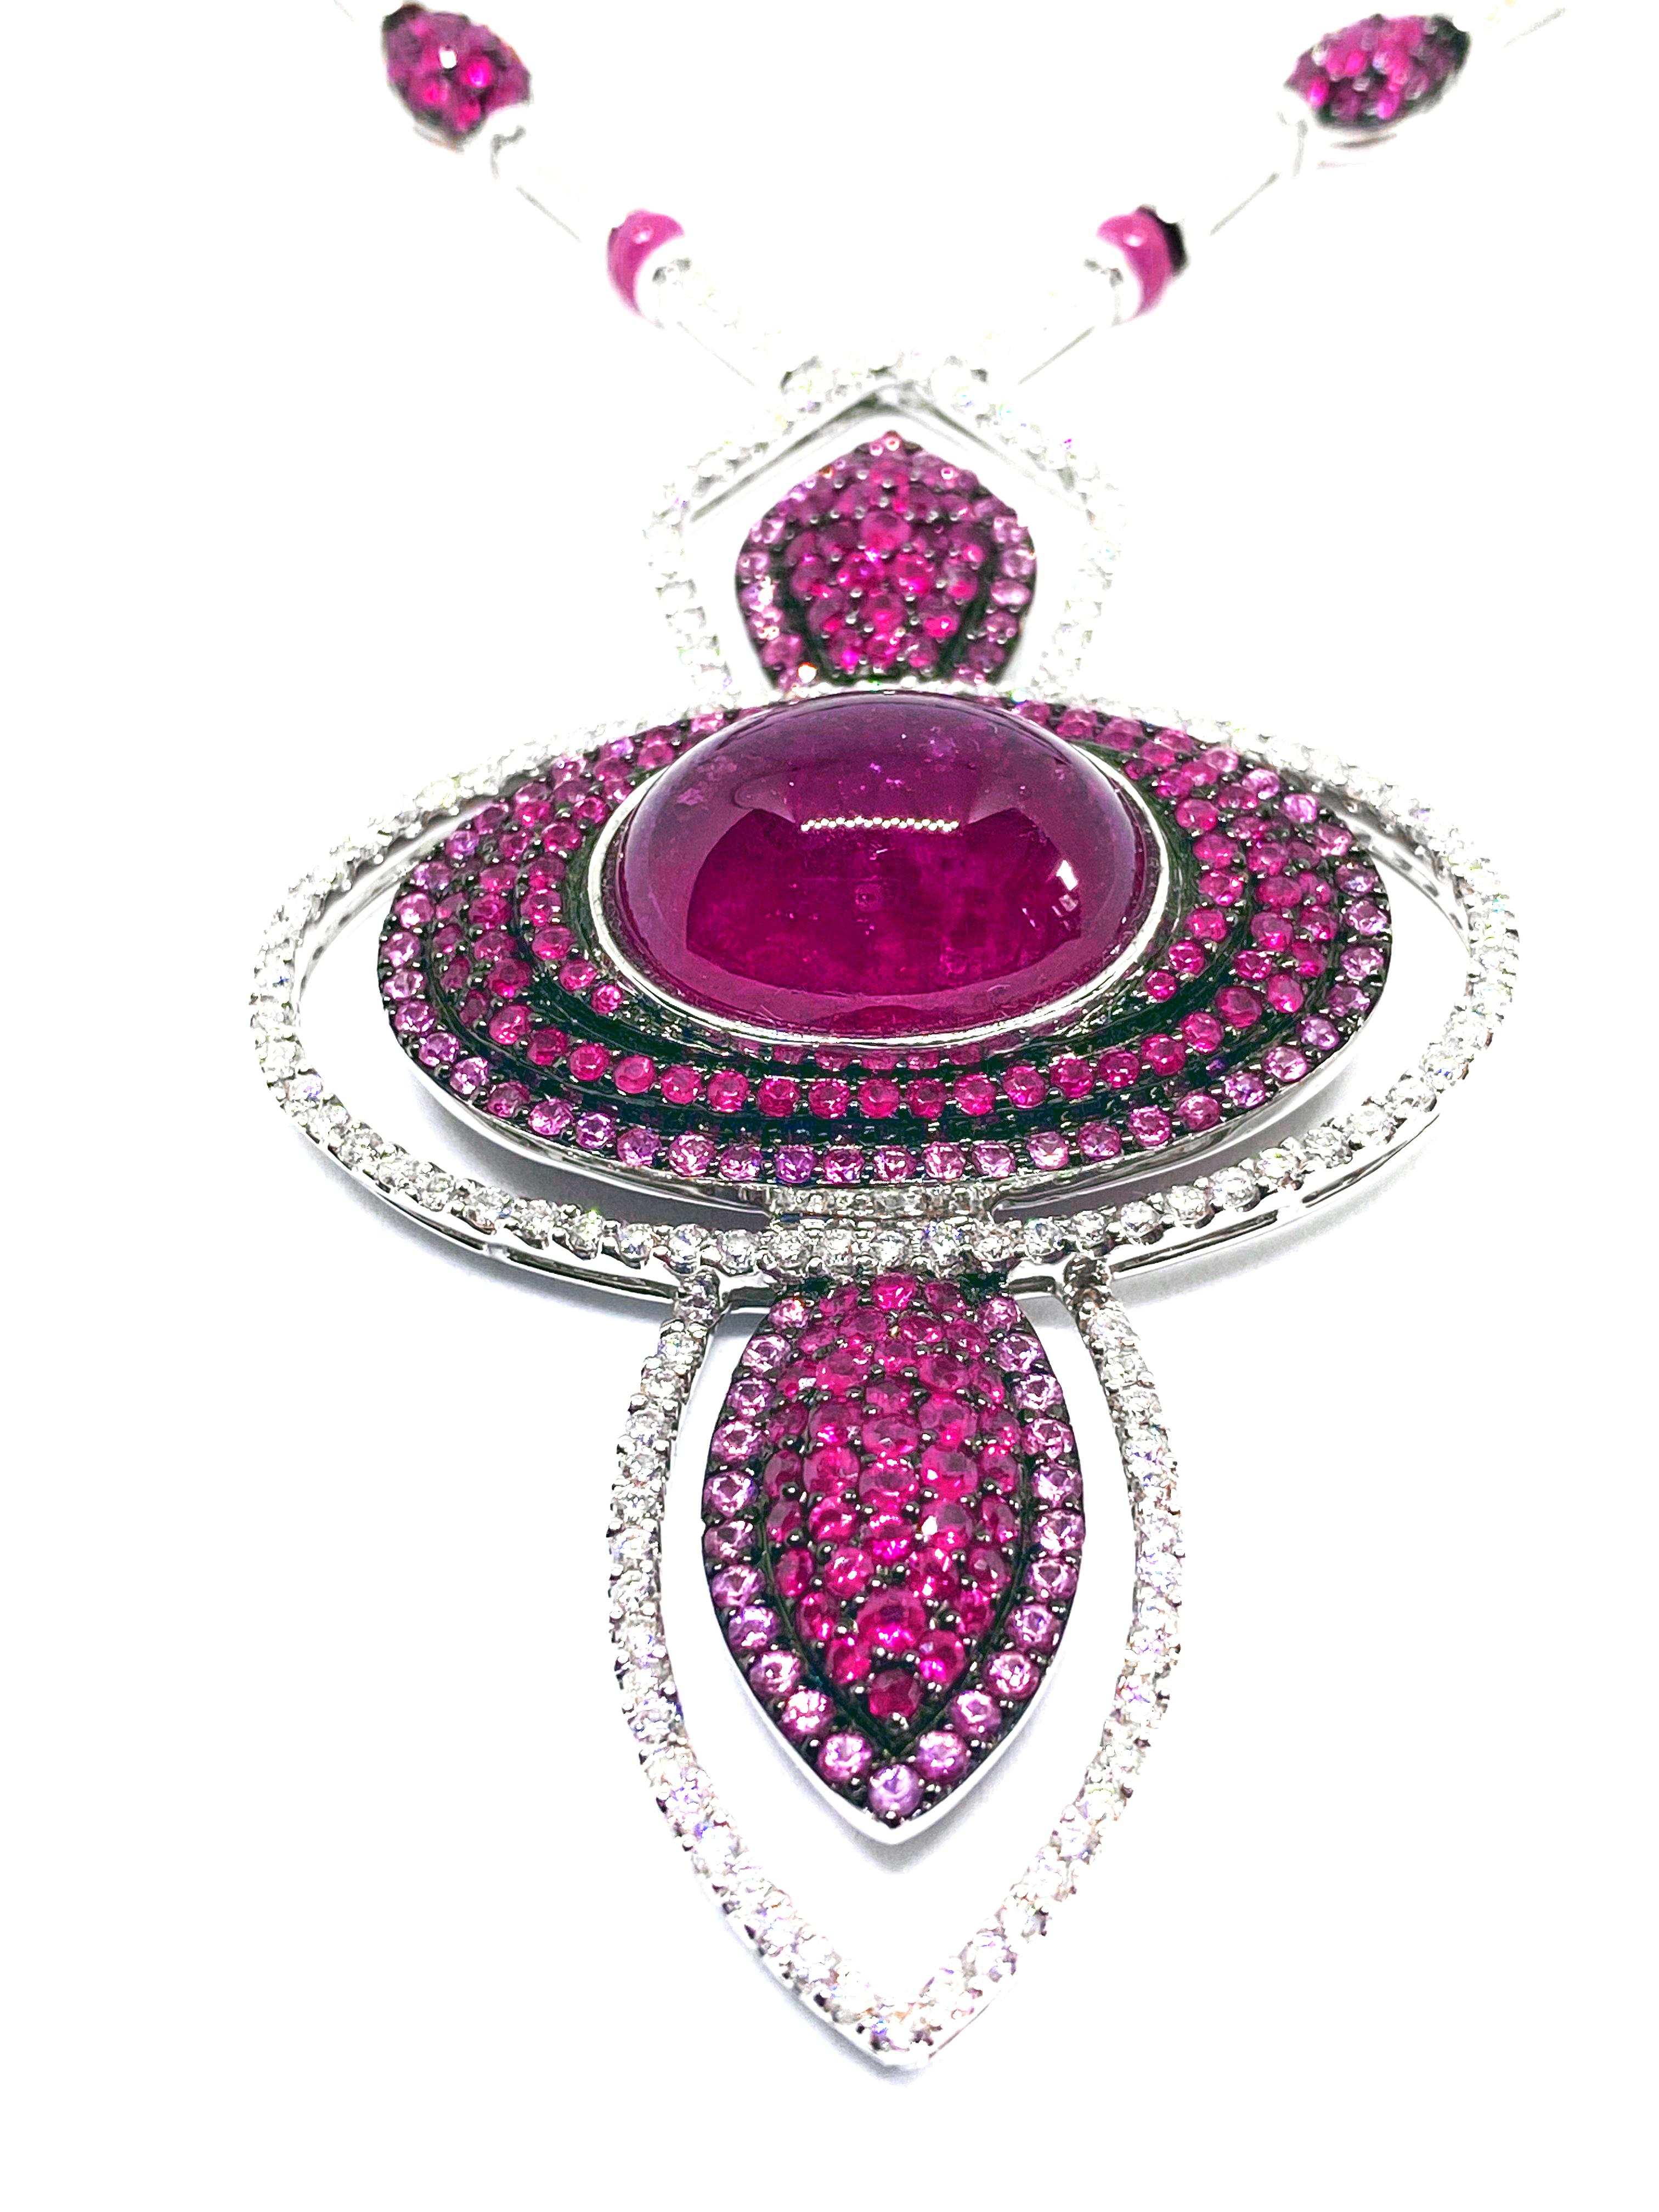 baroque pearl with pink tourmaline set in 18kt gold disc with ruby